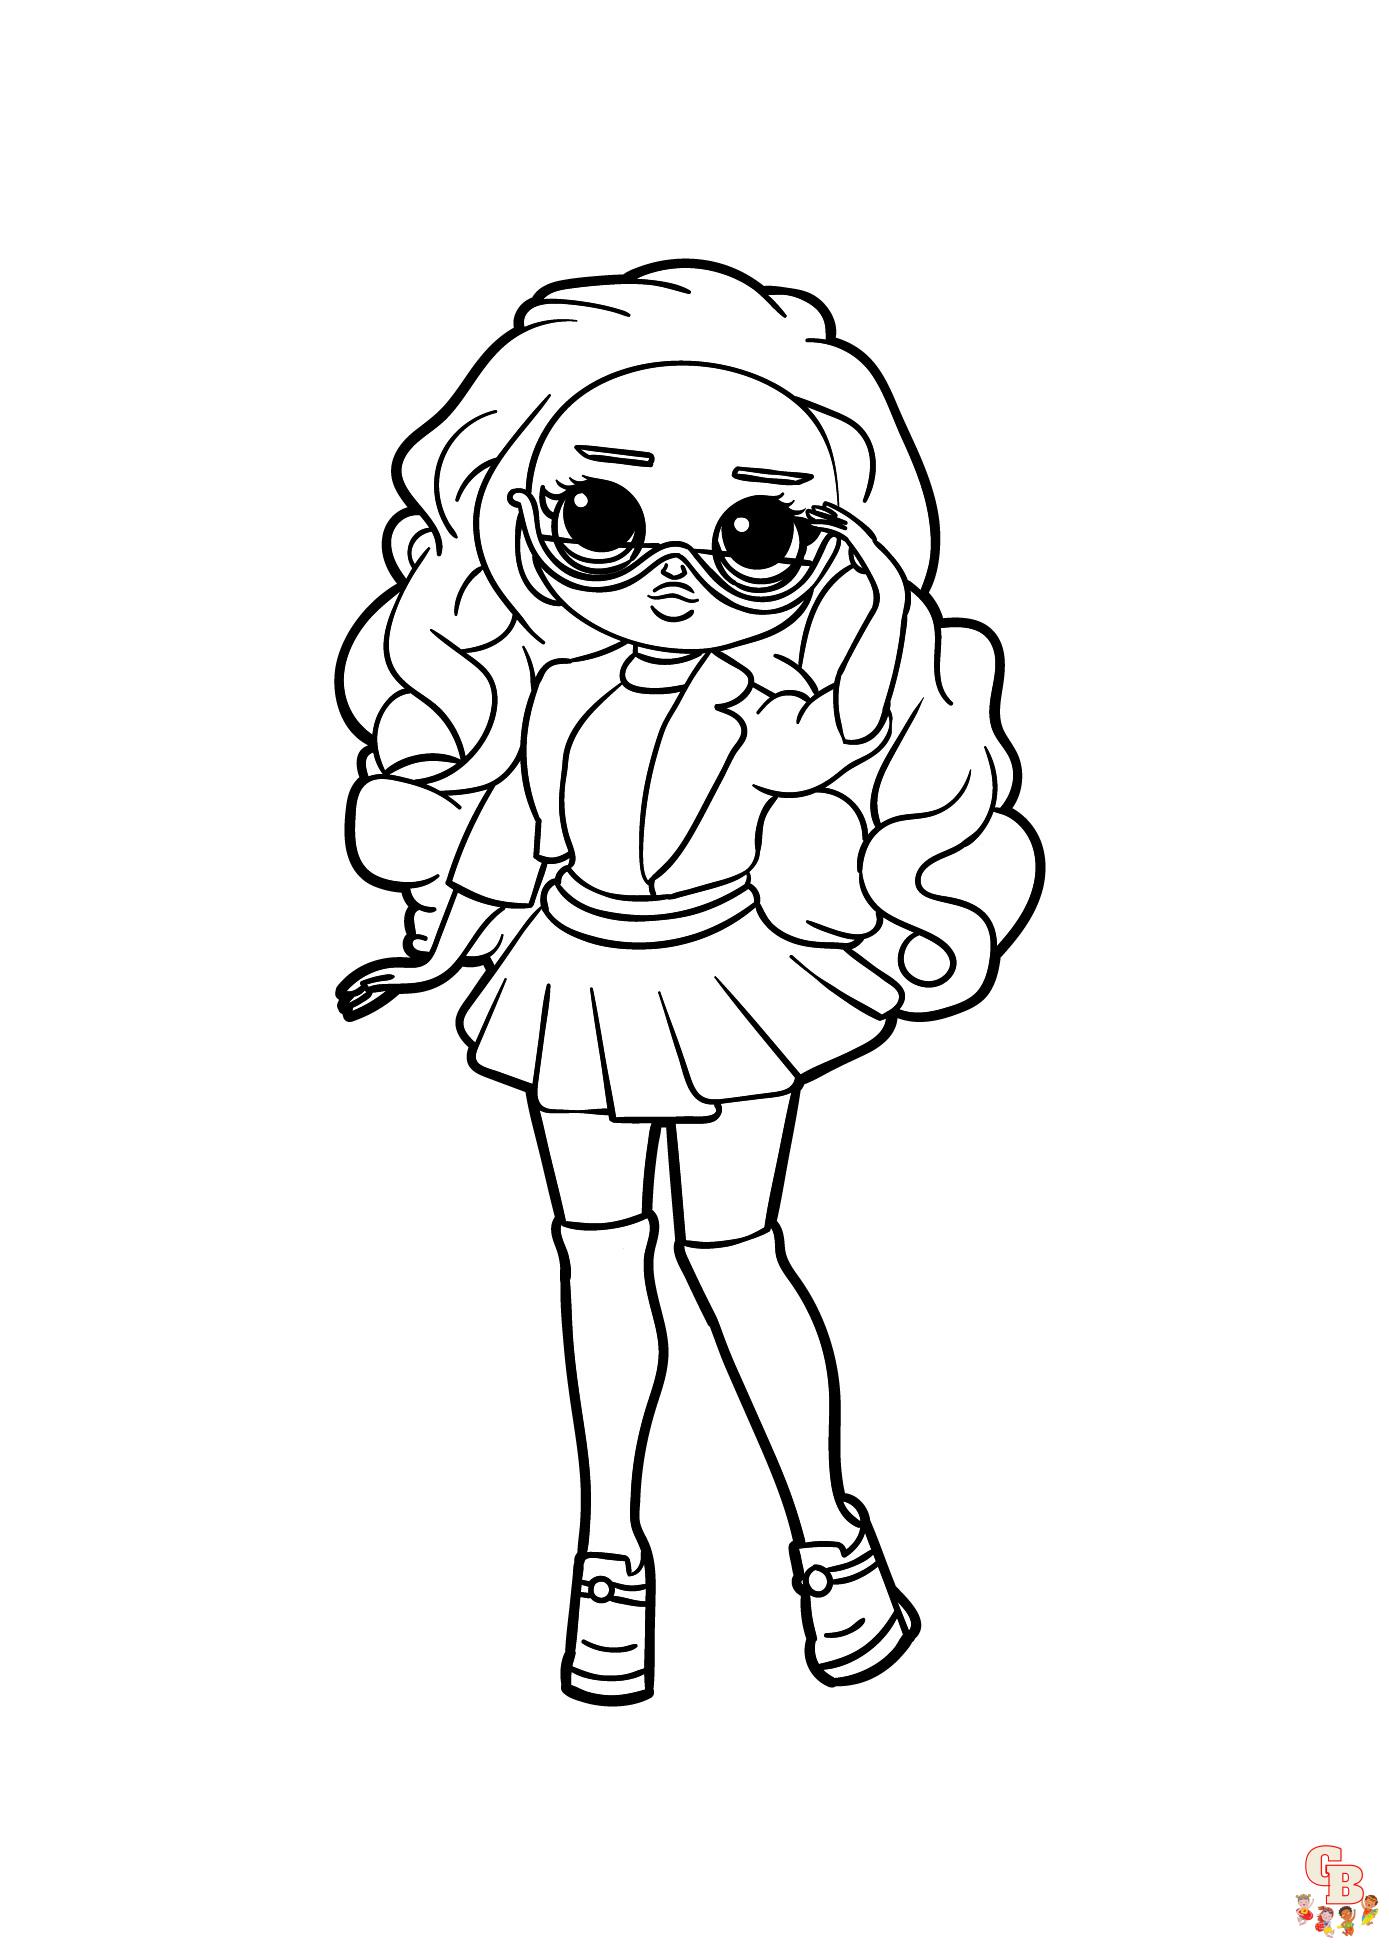 omg fashion lol omg doll coloring pages 2